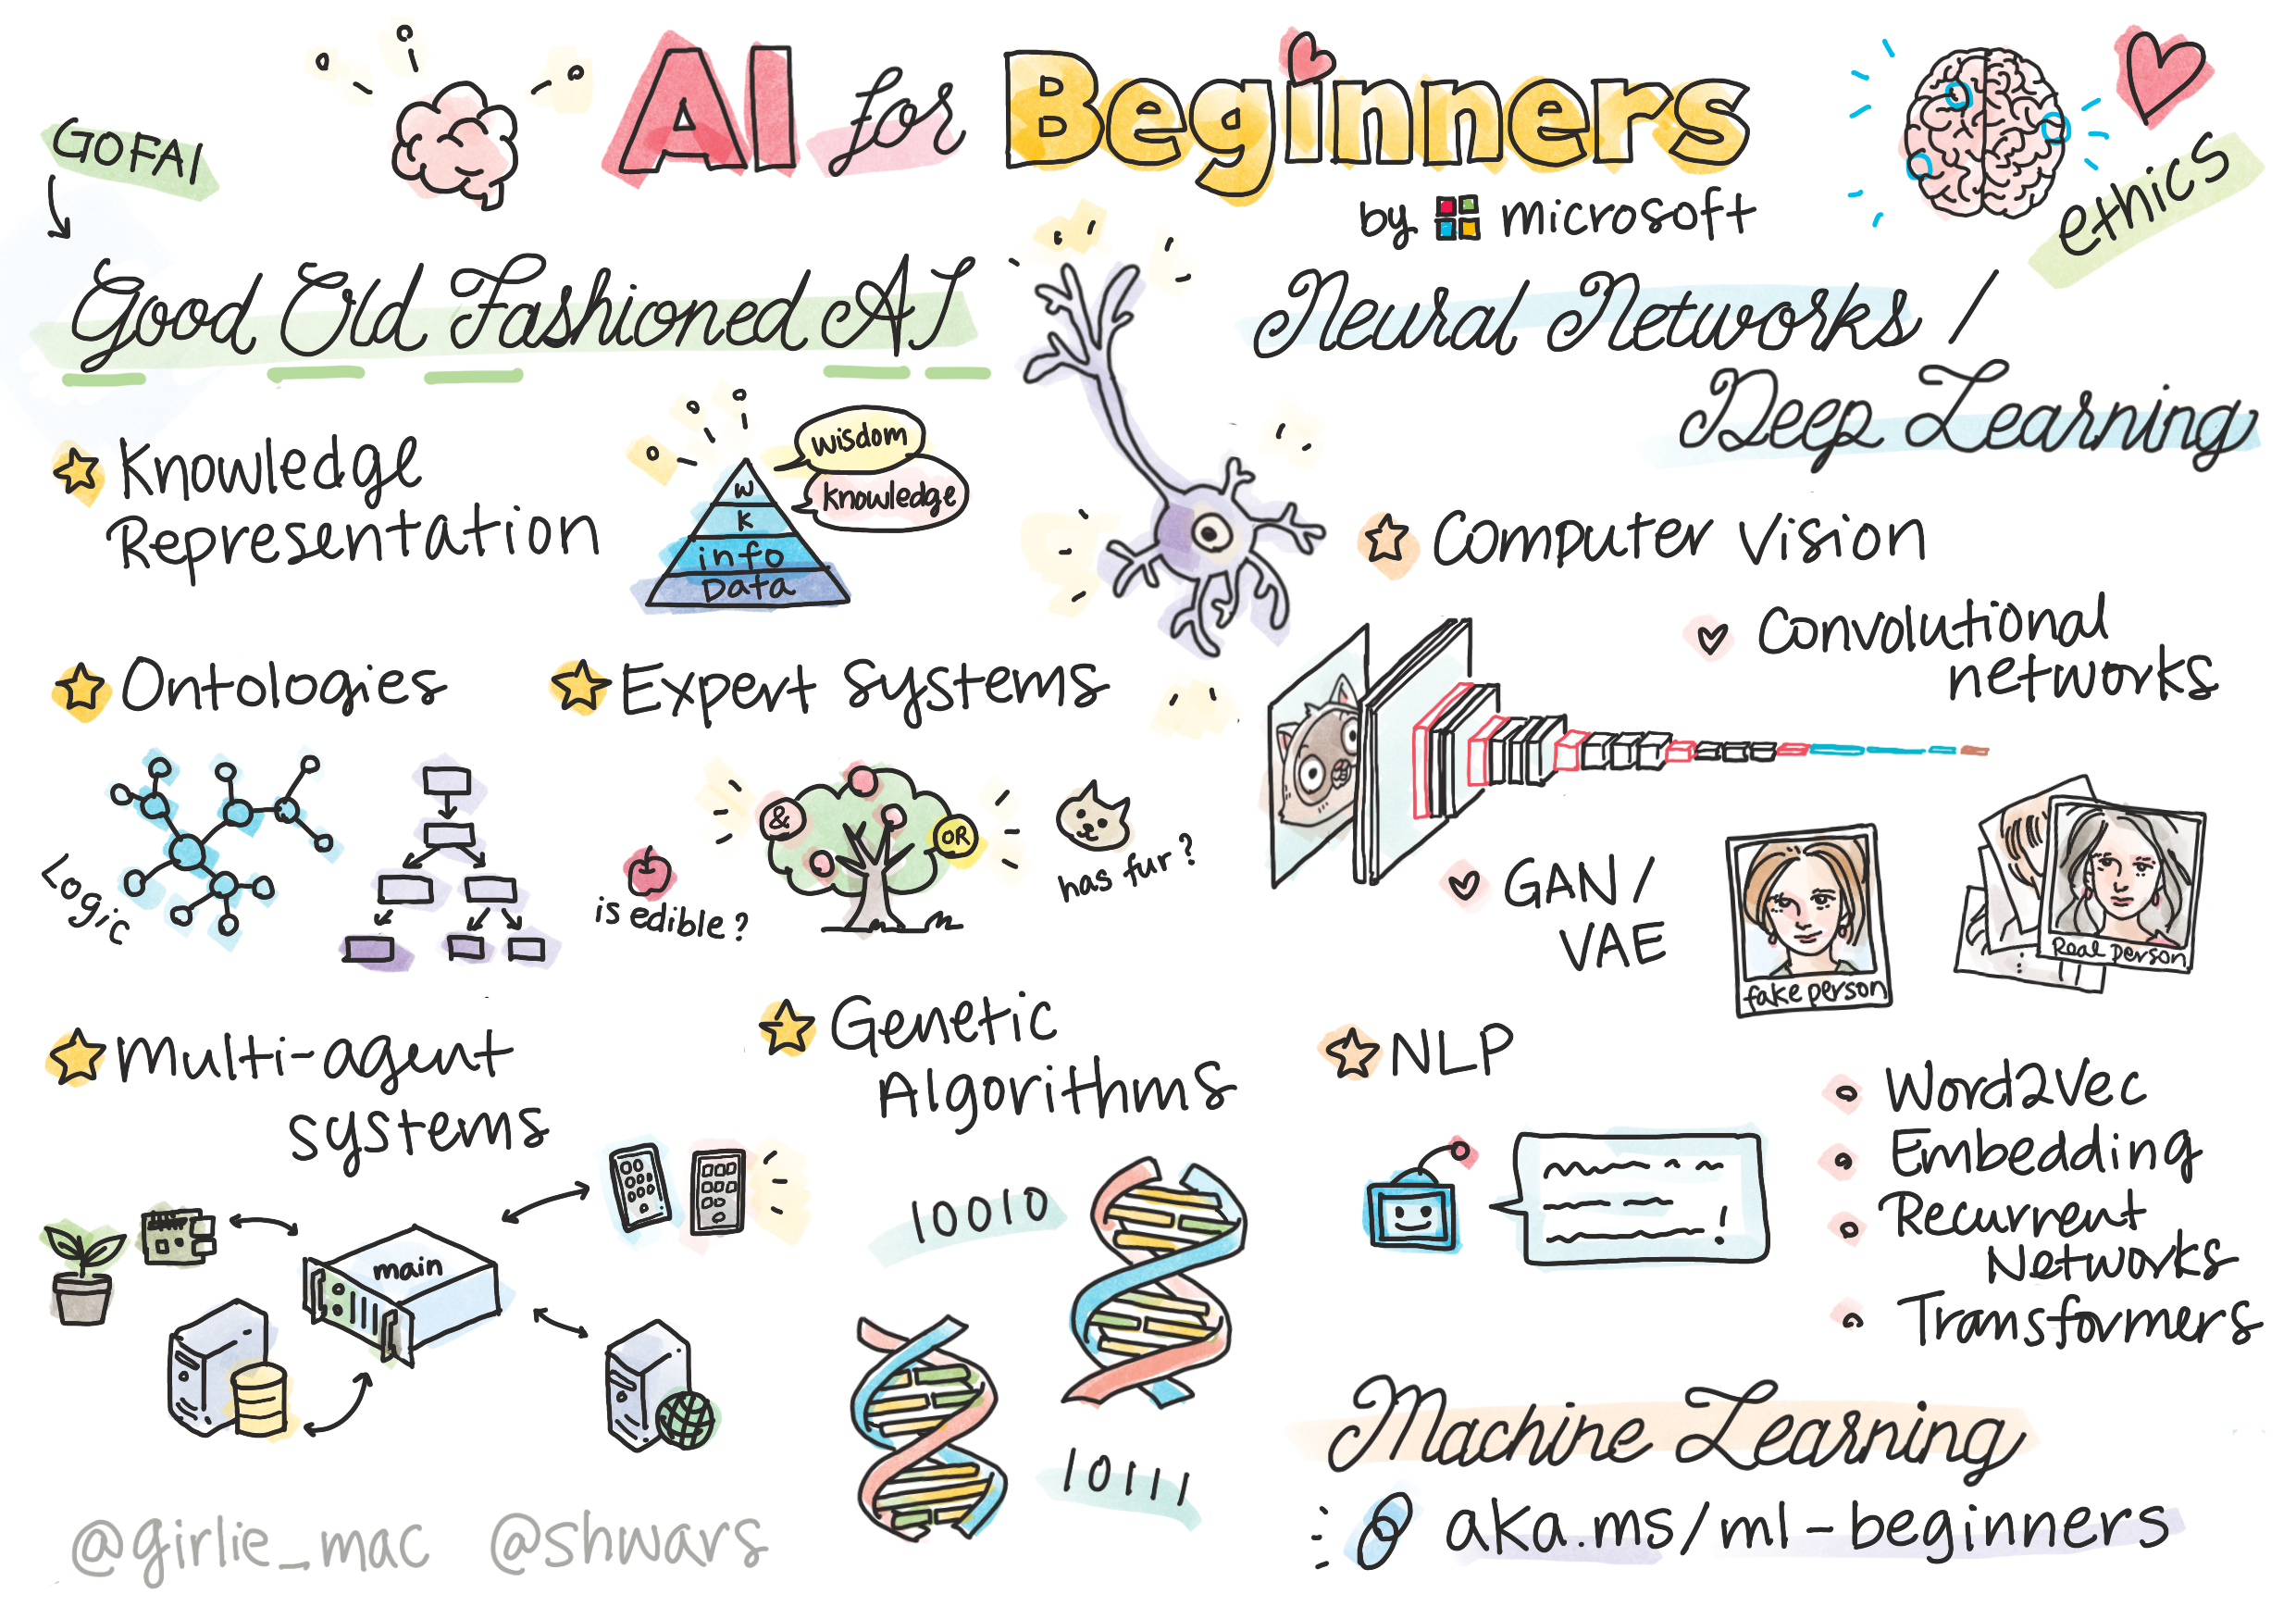 demo-picture-of-AI-For-Beginners